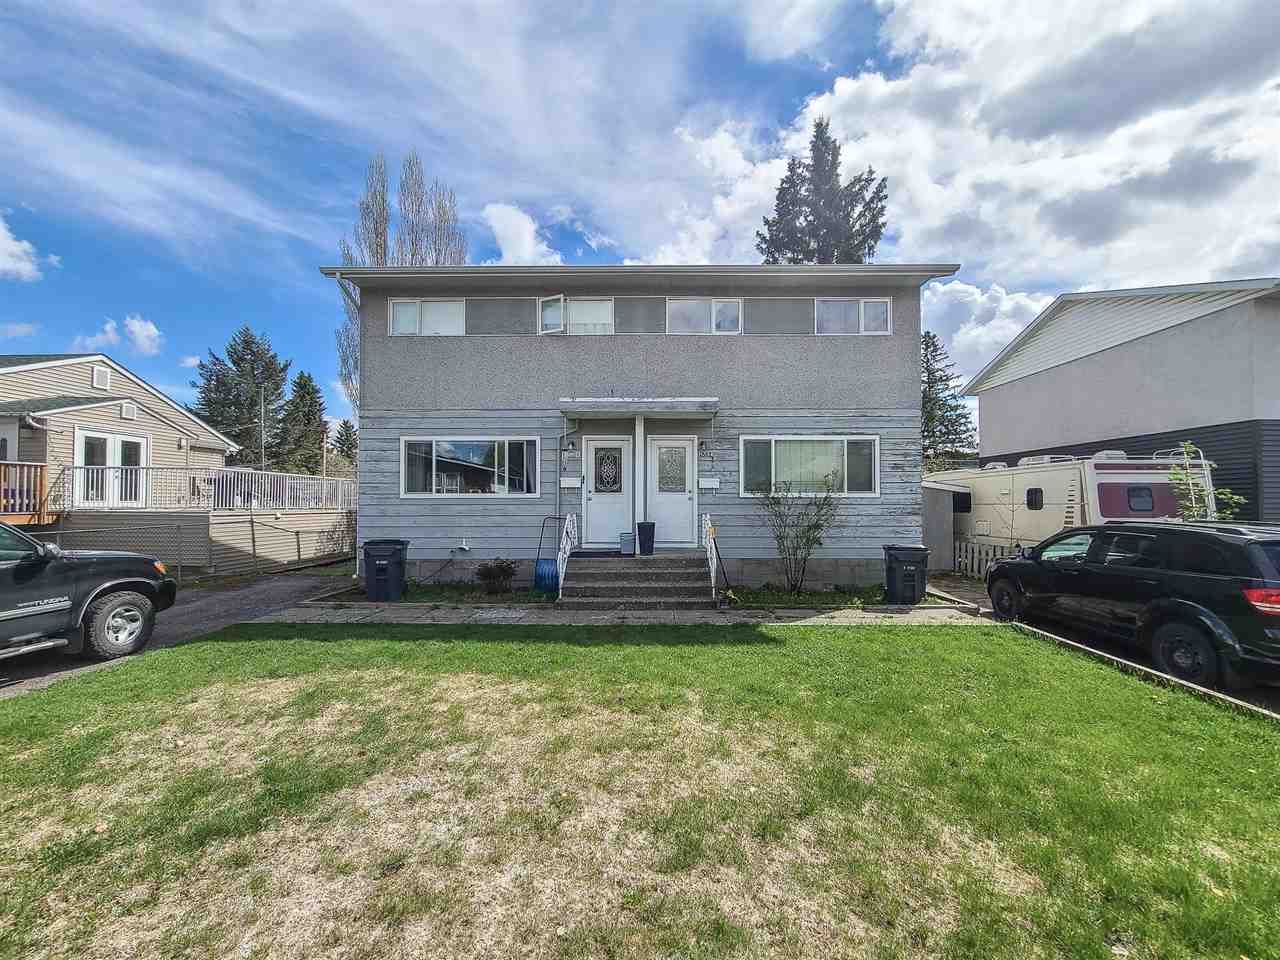 Main Photo: 1800 - 1802 KENWOOD Street in Prince George: Connaught Duplex for sale (PG City Central (Zone 72))  : MLS®# R2578564